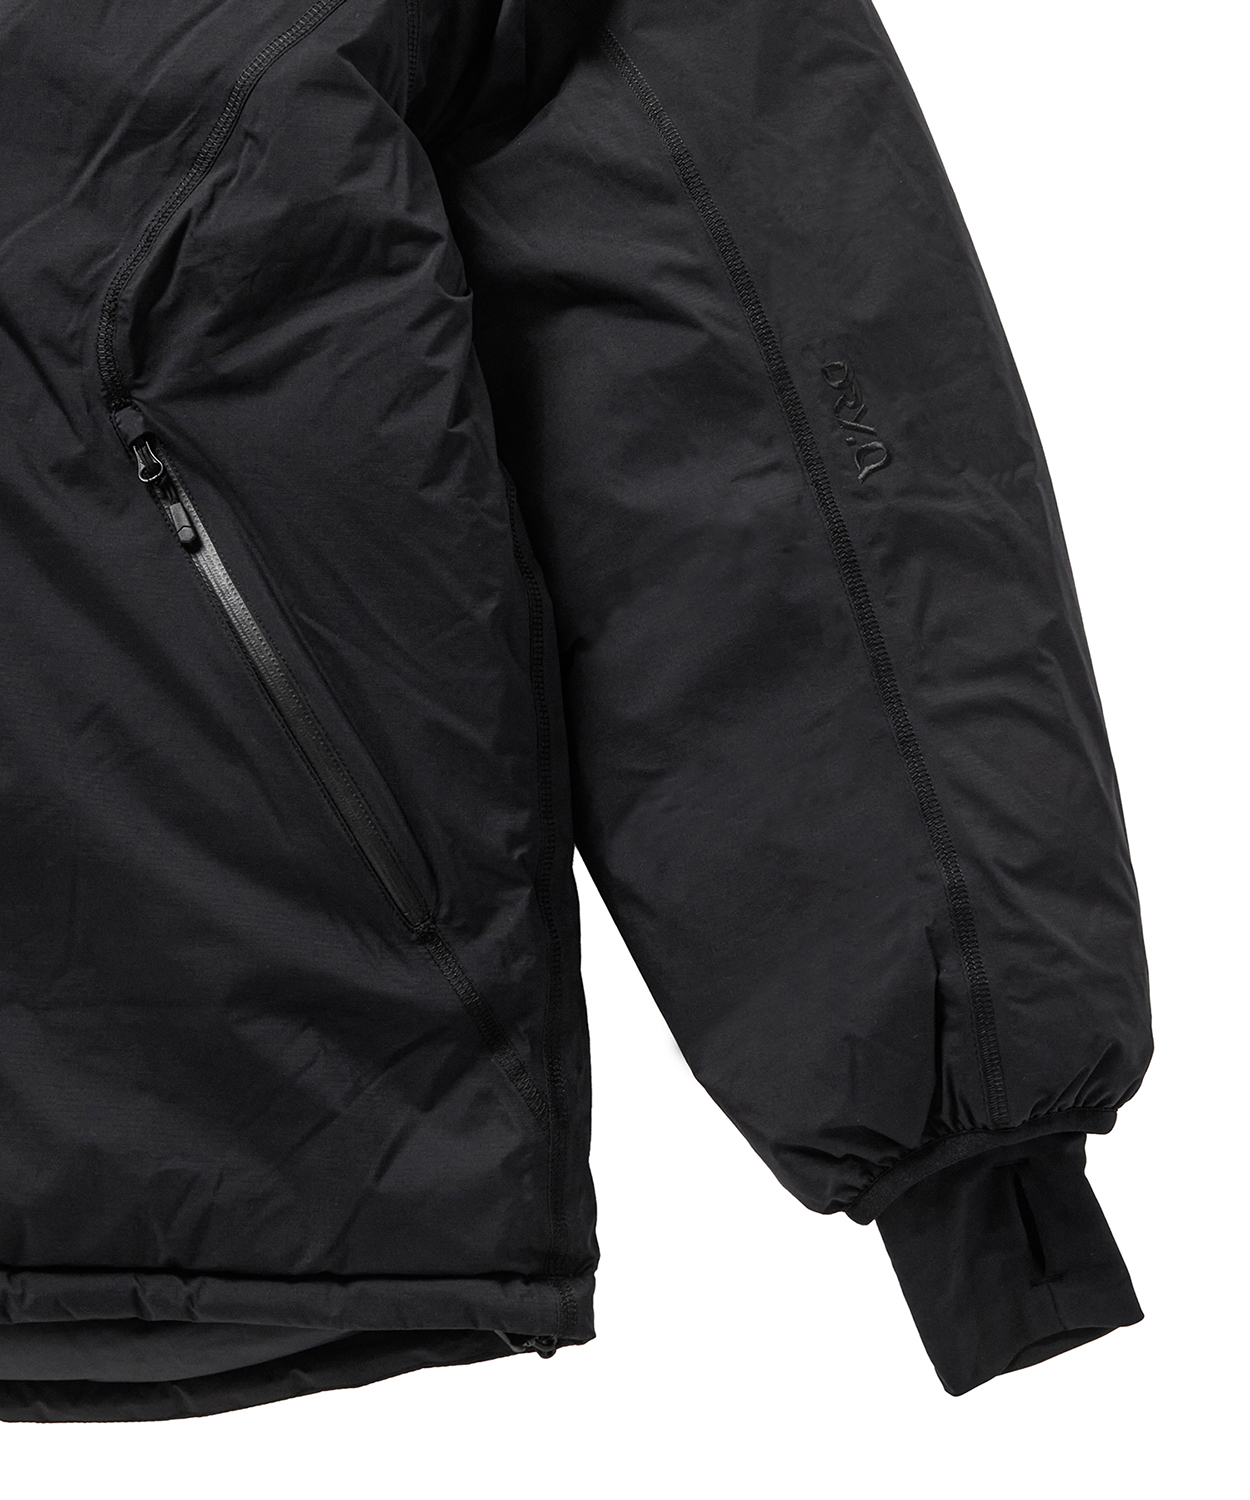 MHW MOUNTAIN HARDWEAR SPECIALLY FOR N.HOOLYWOODの名品が復刻